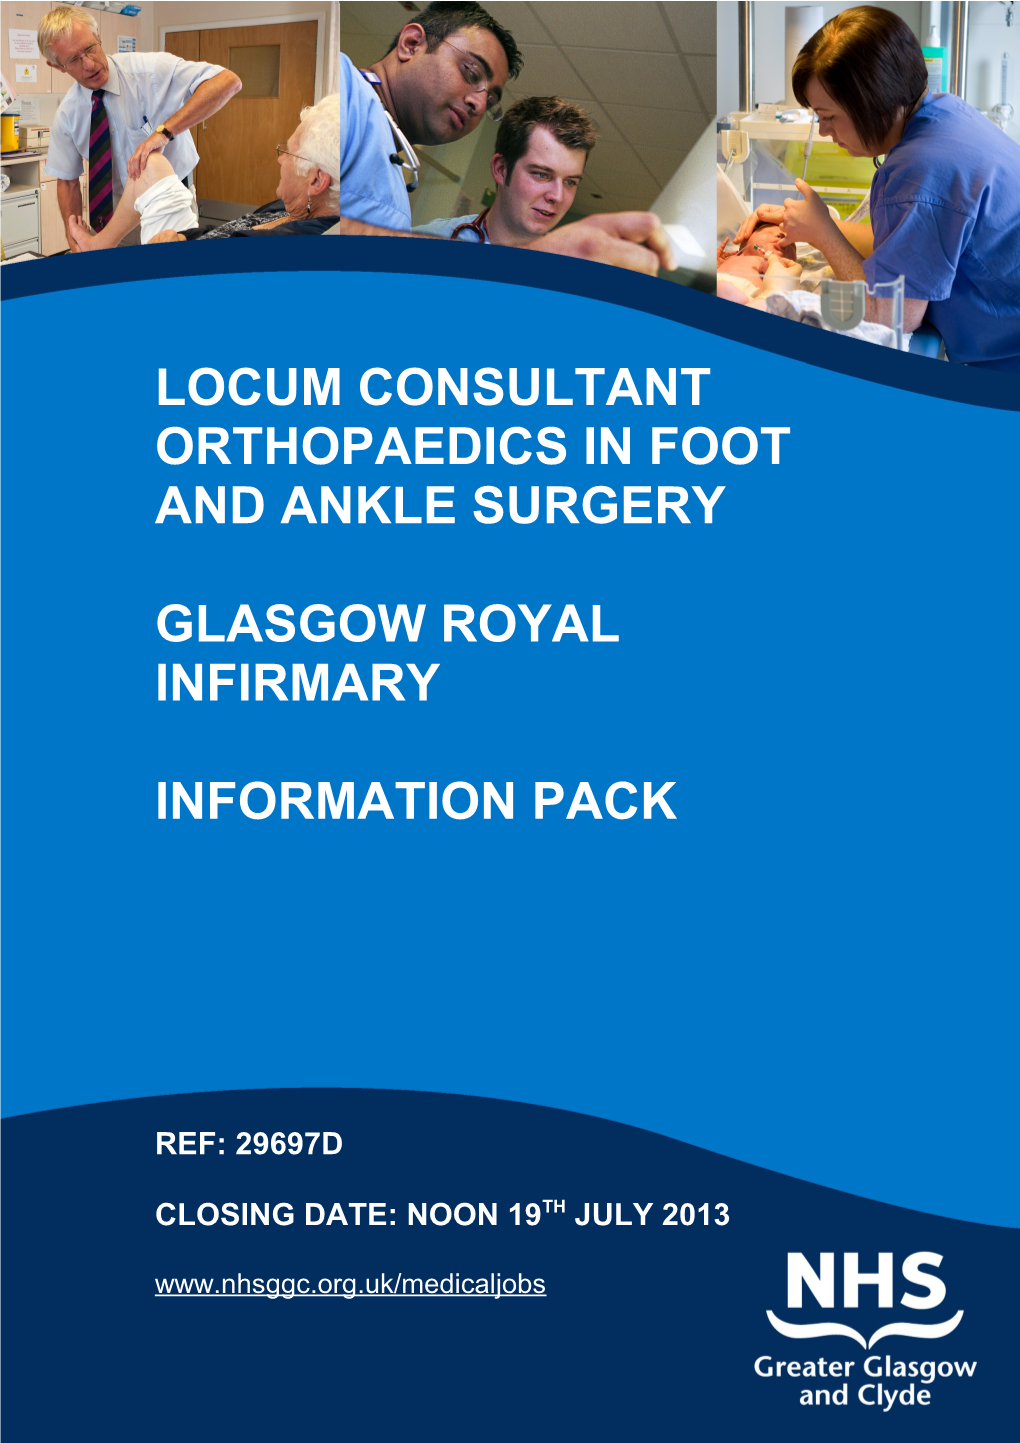 Locum Consultant Orthopaedics in Foot and Ankle Surgery